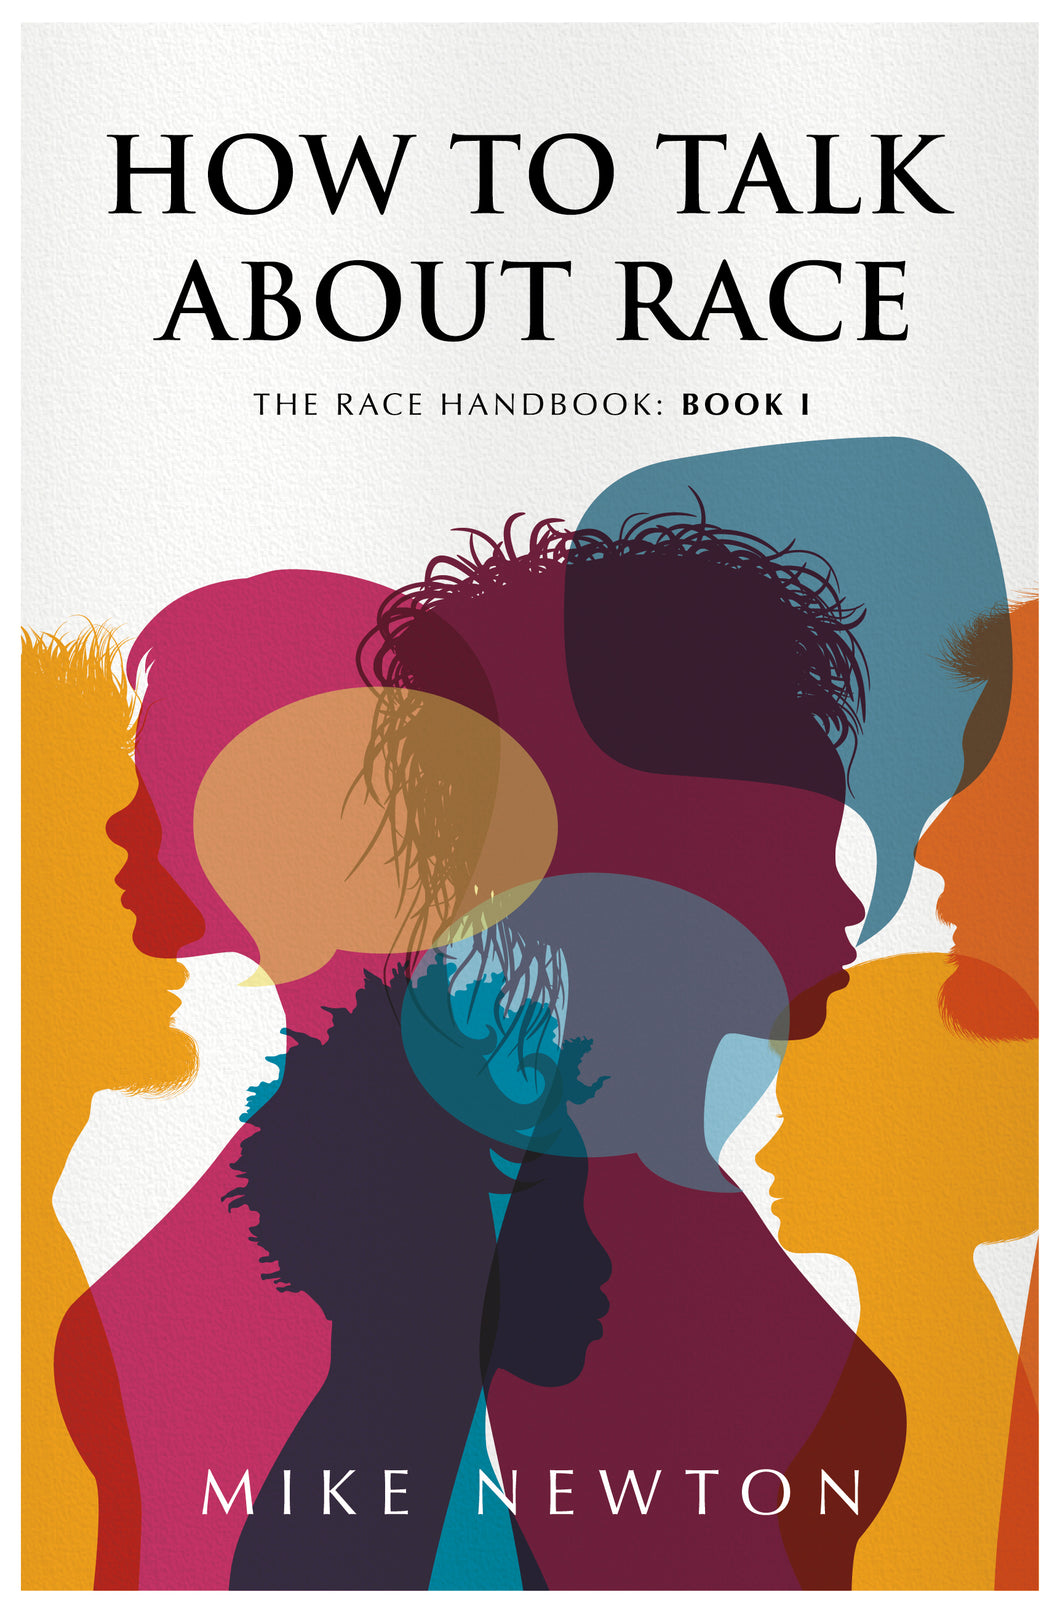 How to talk About Race - Mike Newton